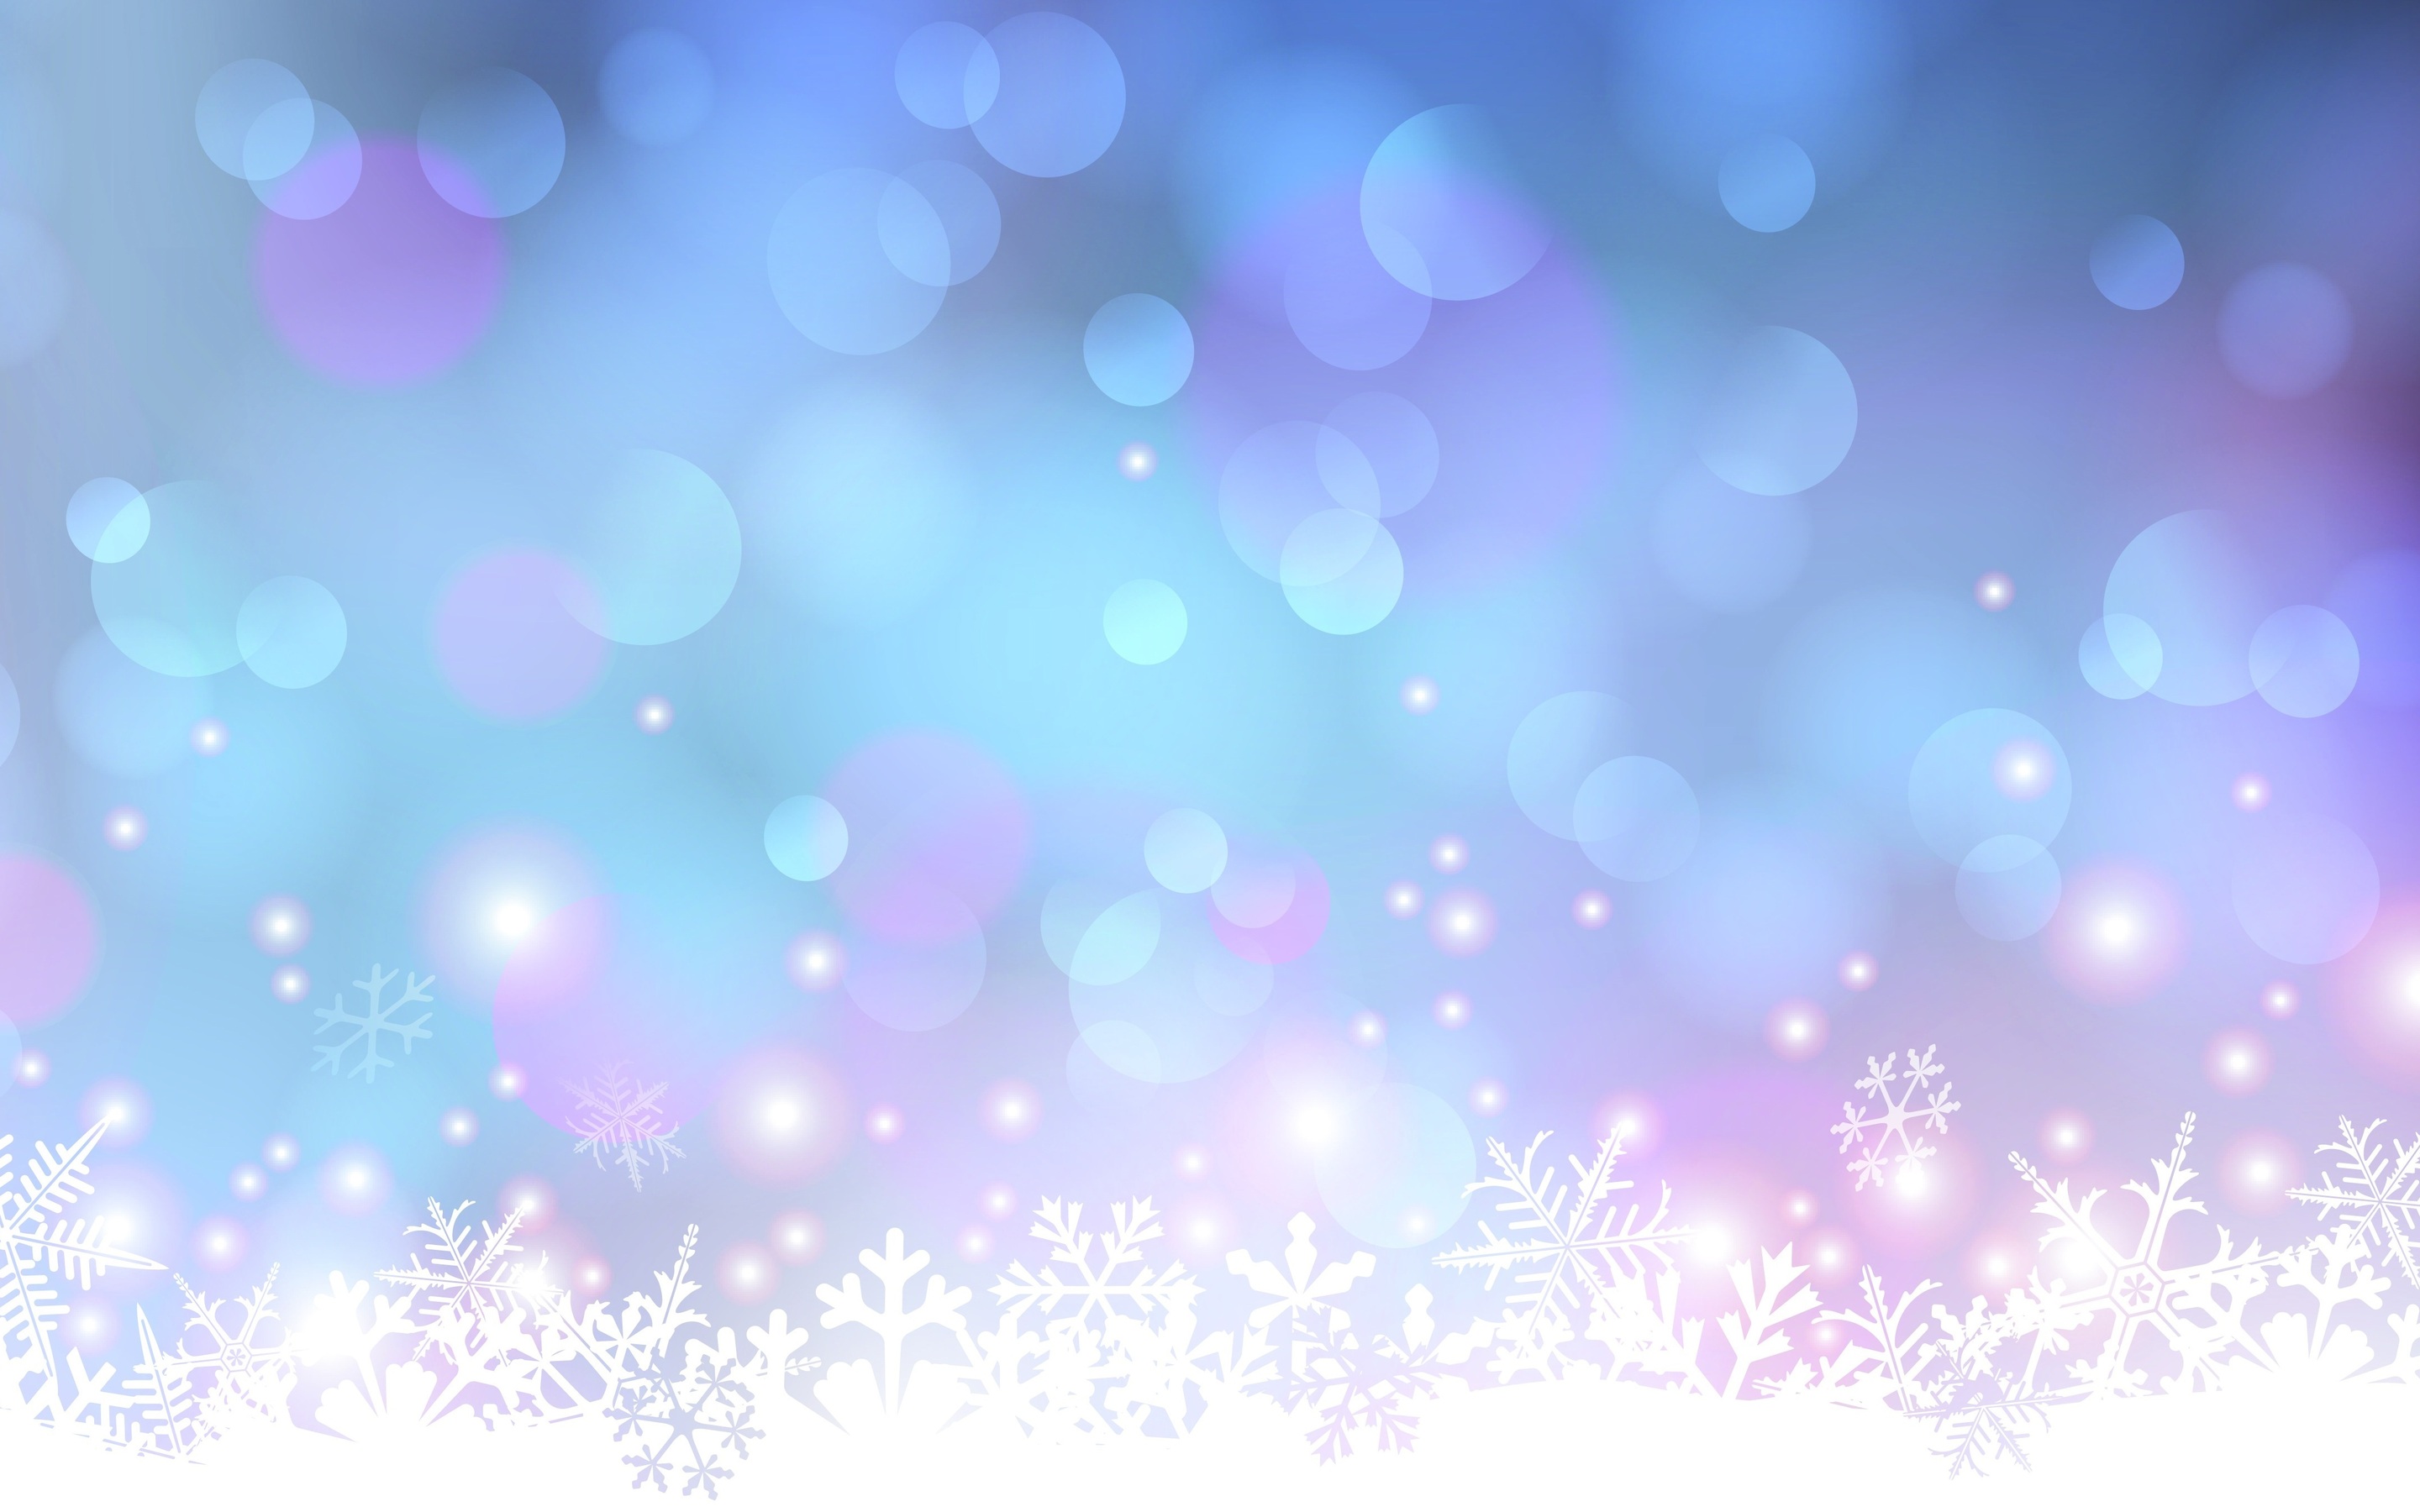 Purple Blur With Snowflakes Background